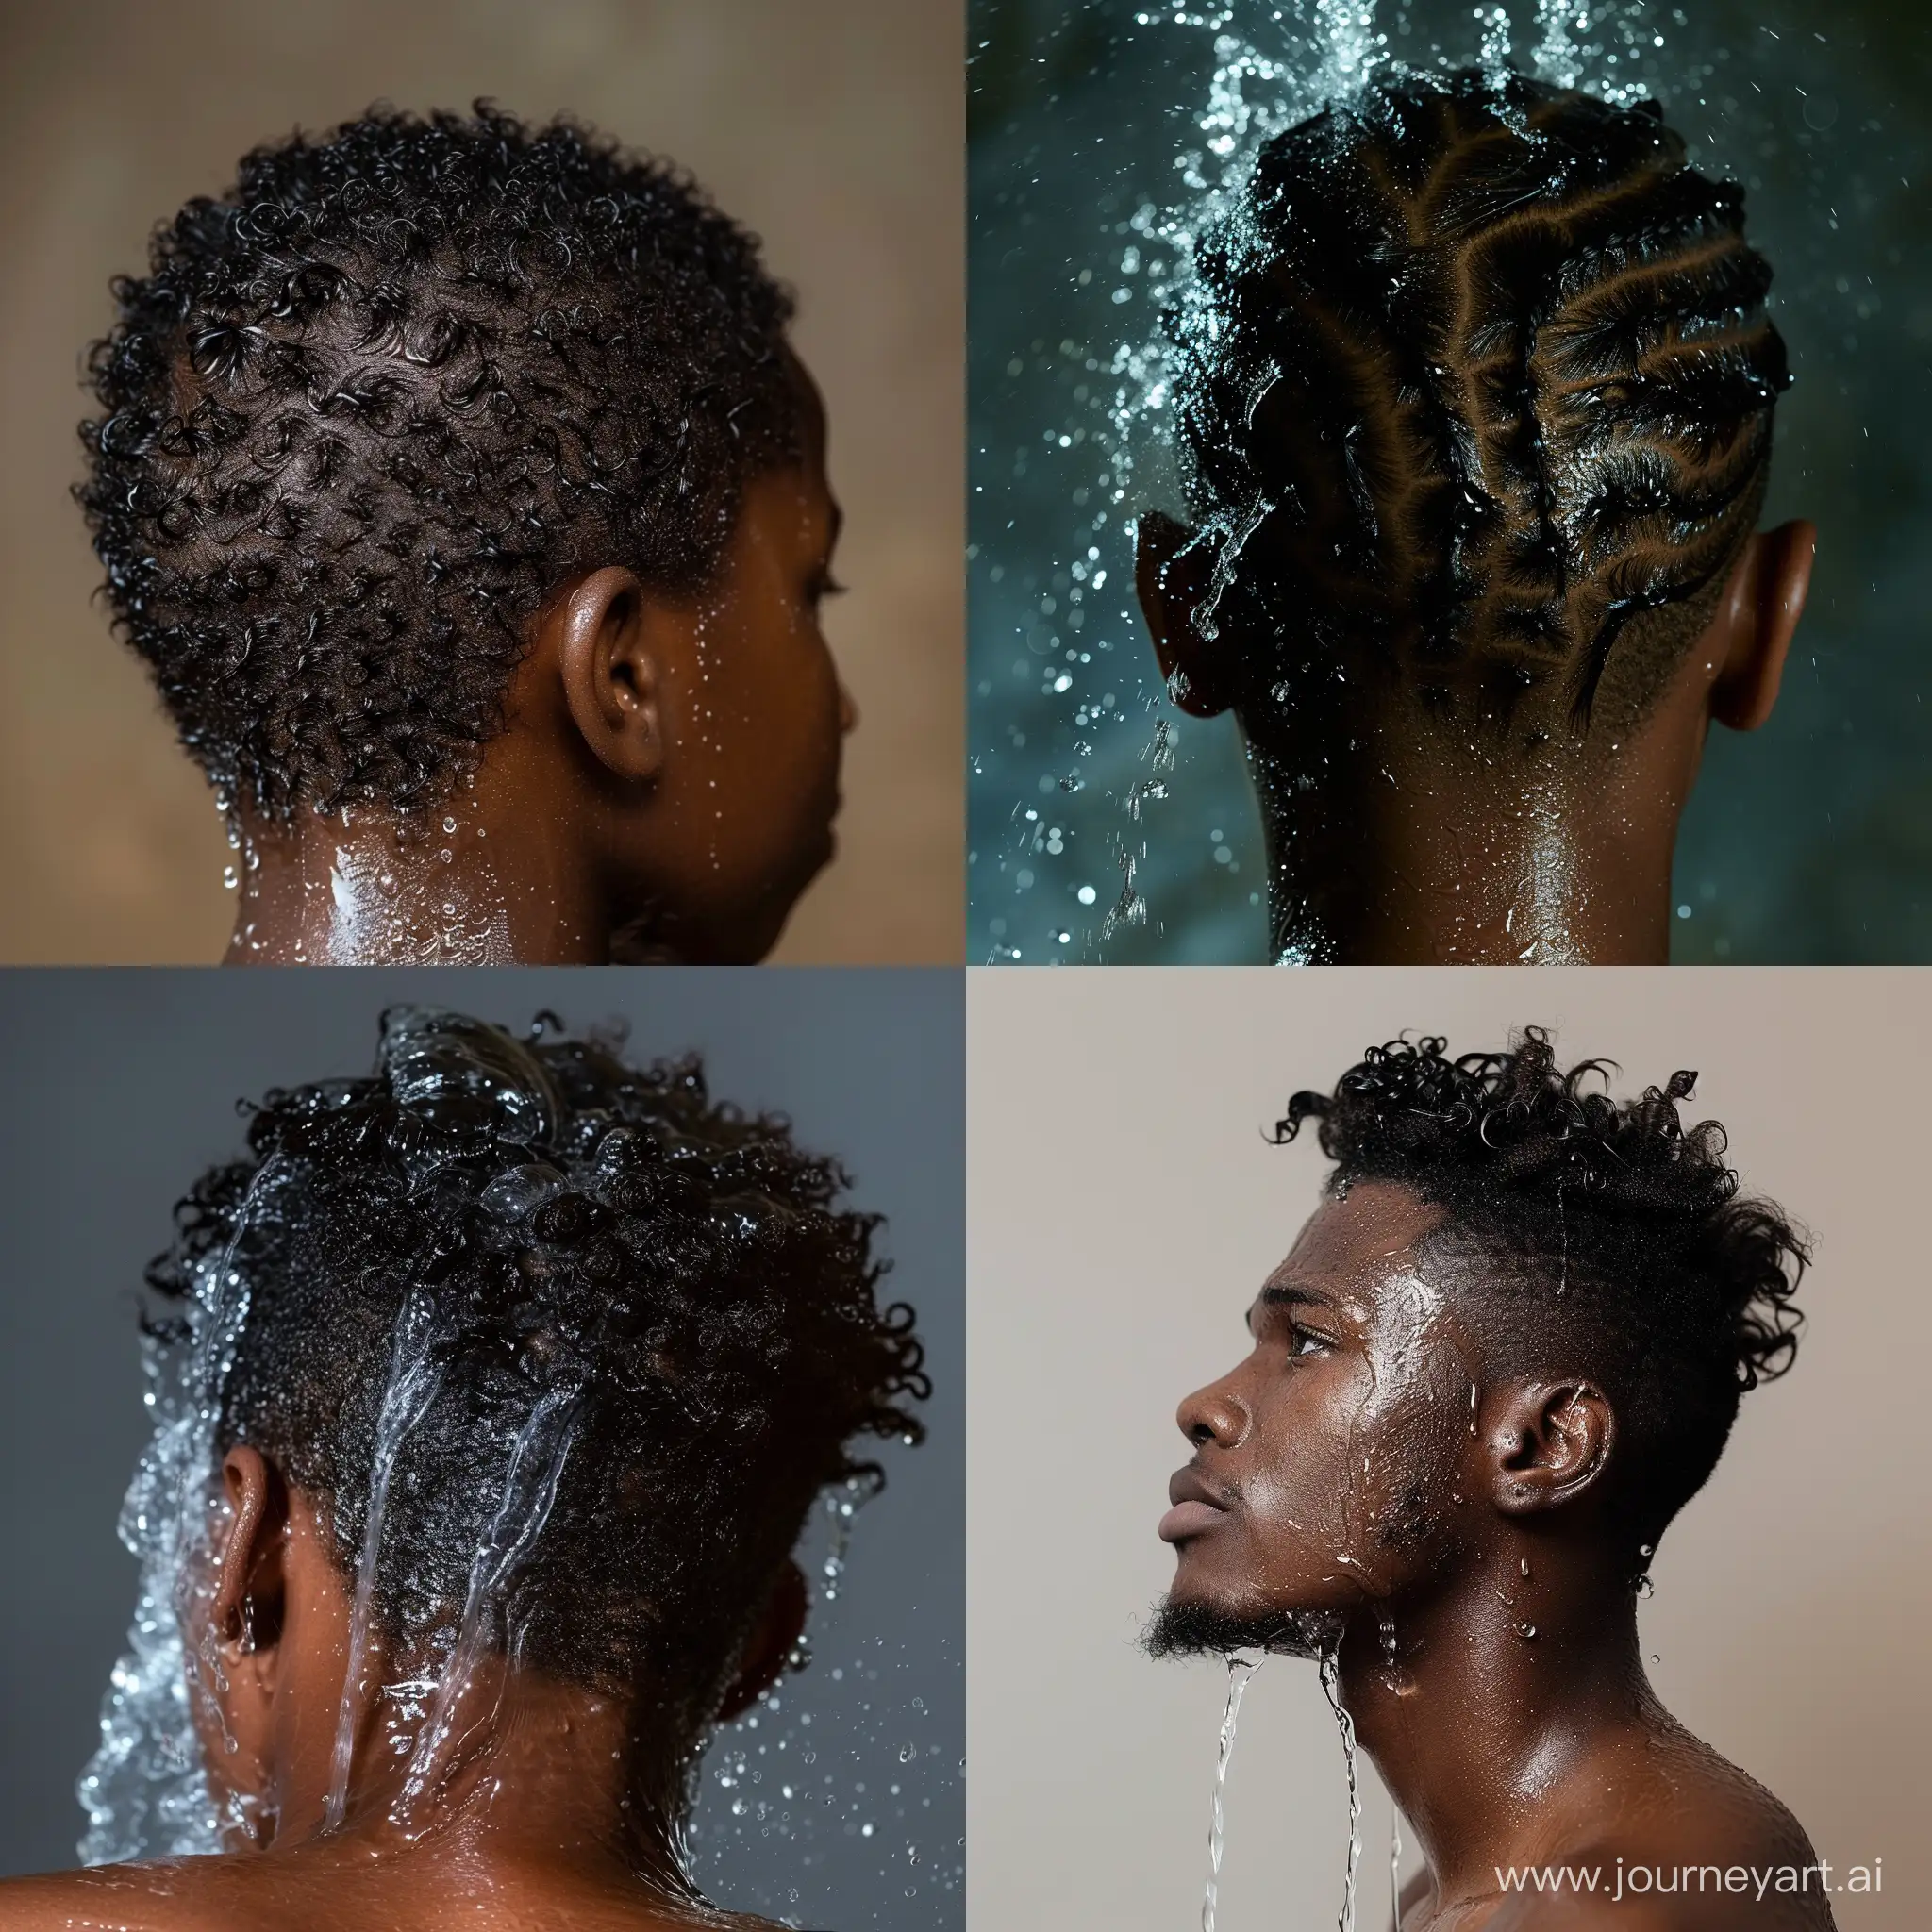 African man boy’s hair with water